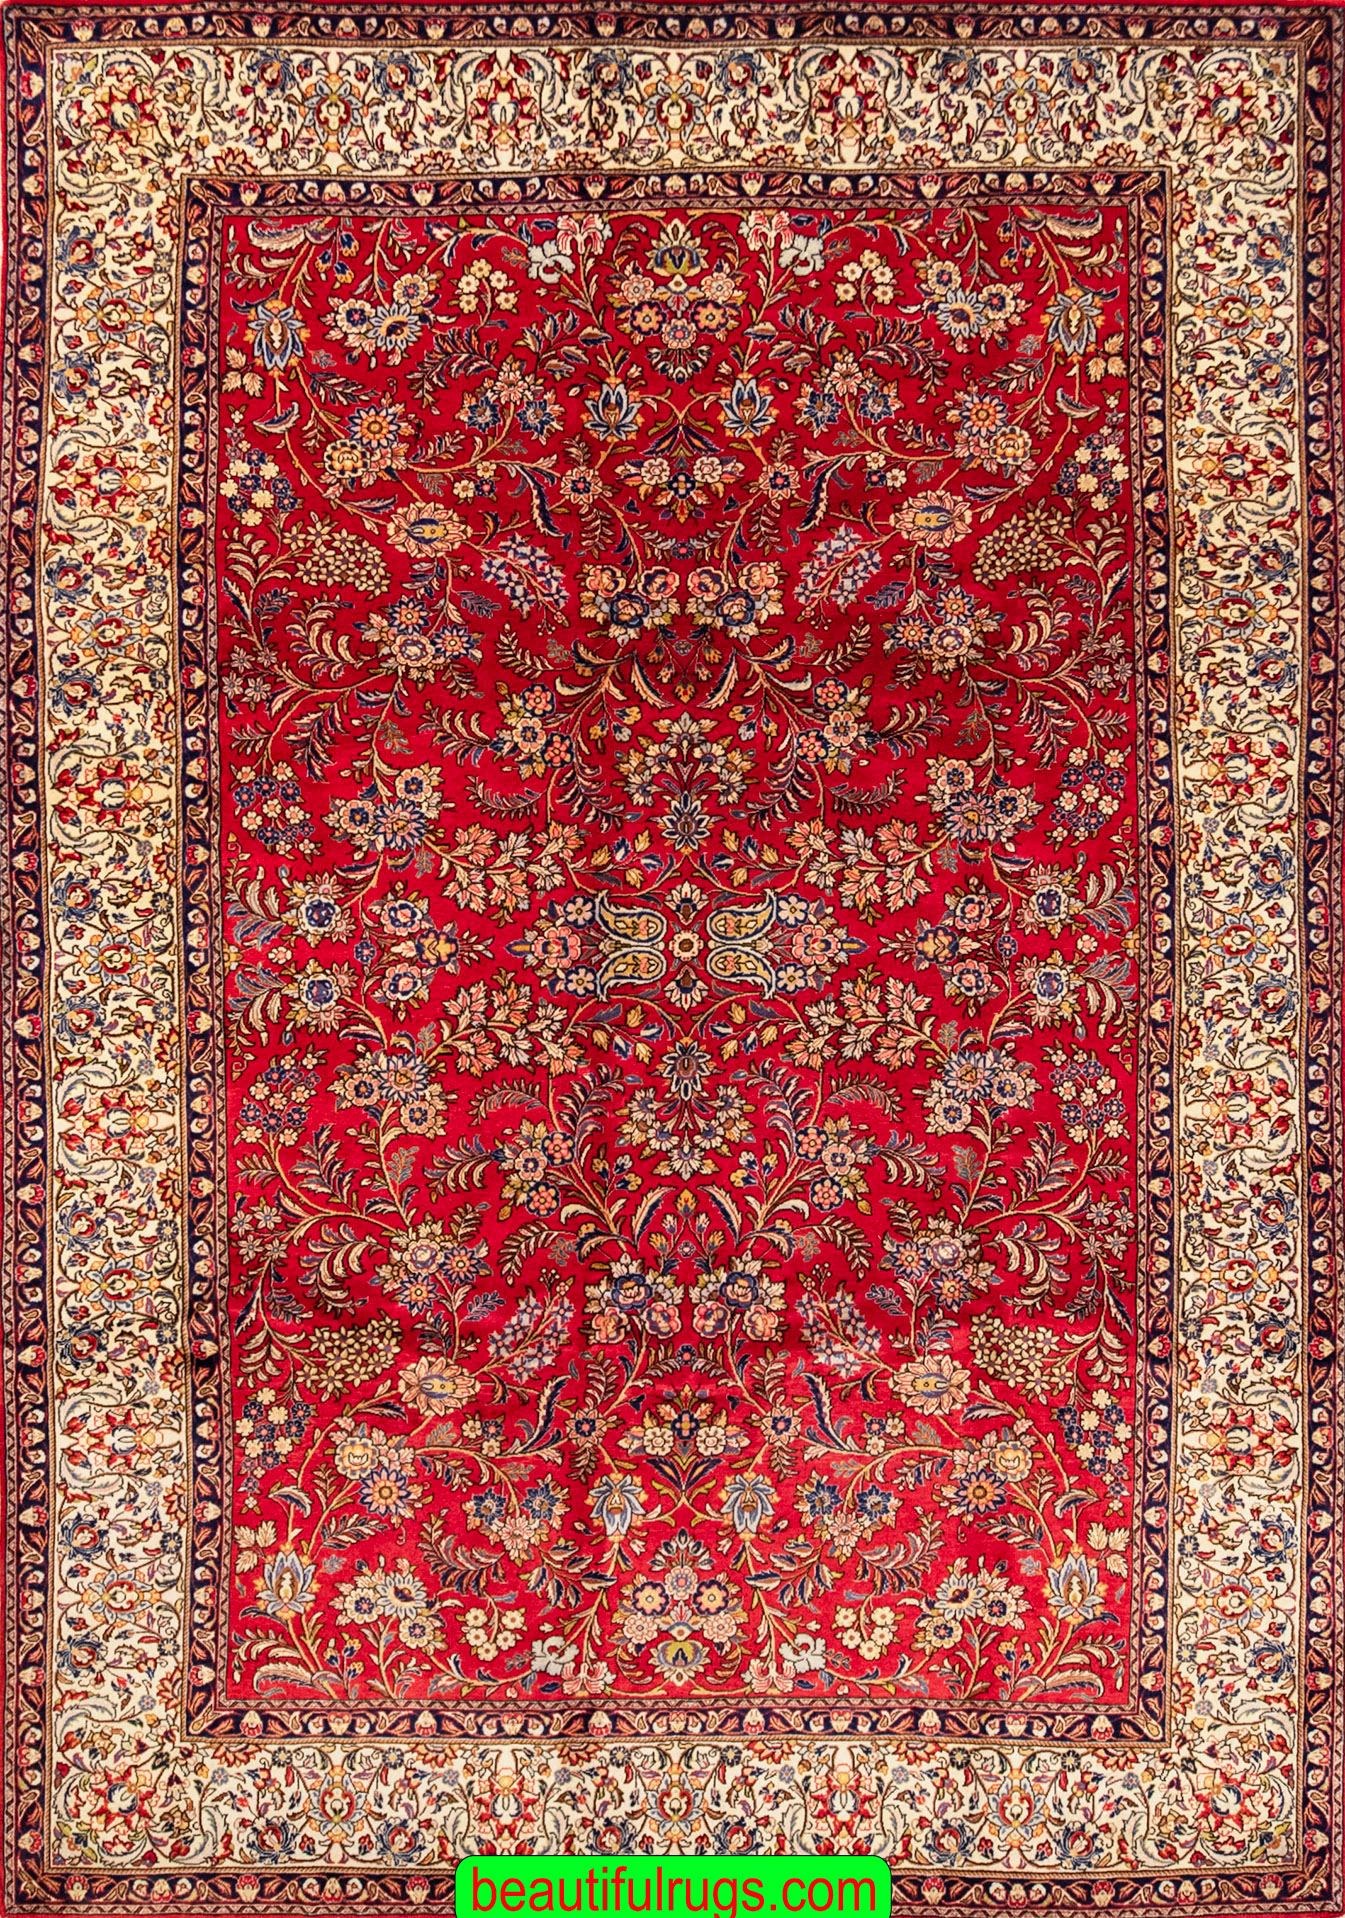 Persian Sarouk rug with red and beige color. Size 7x10.3